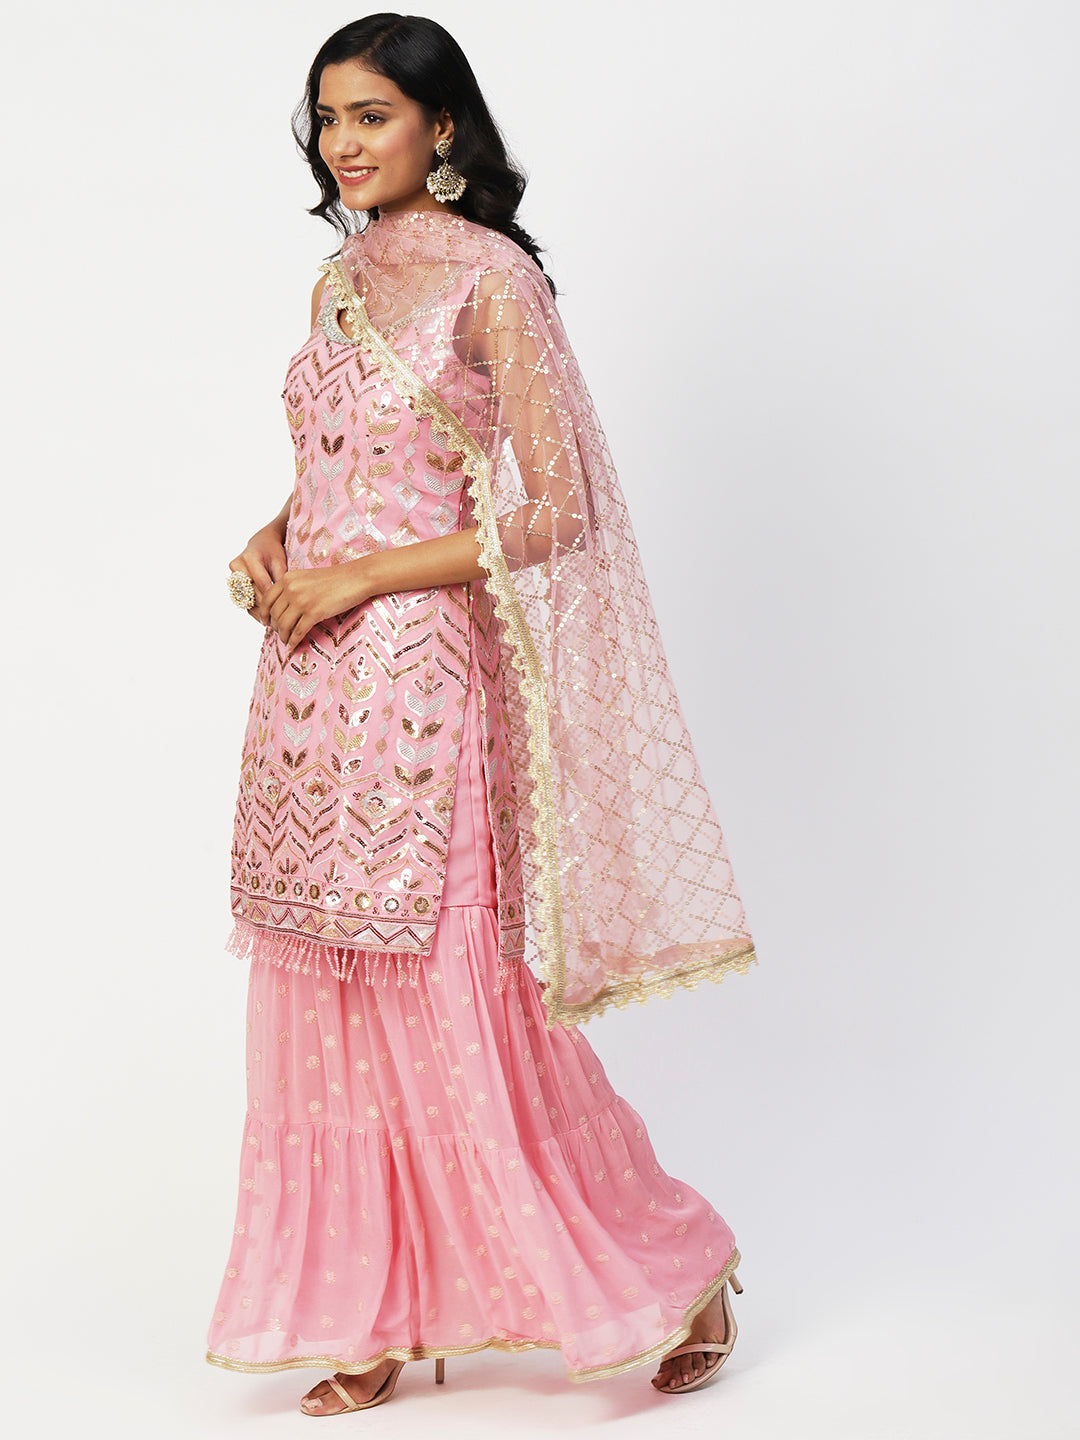 Pink Georgette Sharara Suit with Silver and Gold Sequin Embellishments from PepaBai